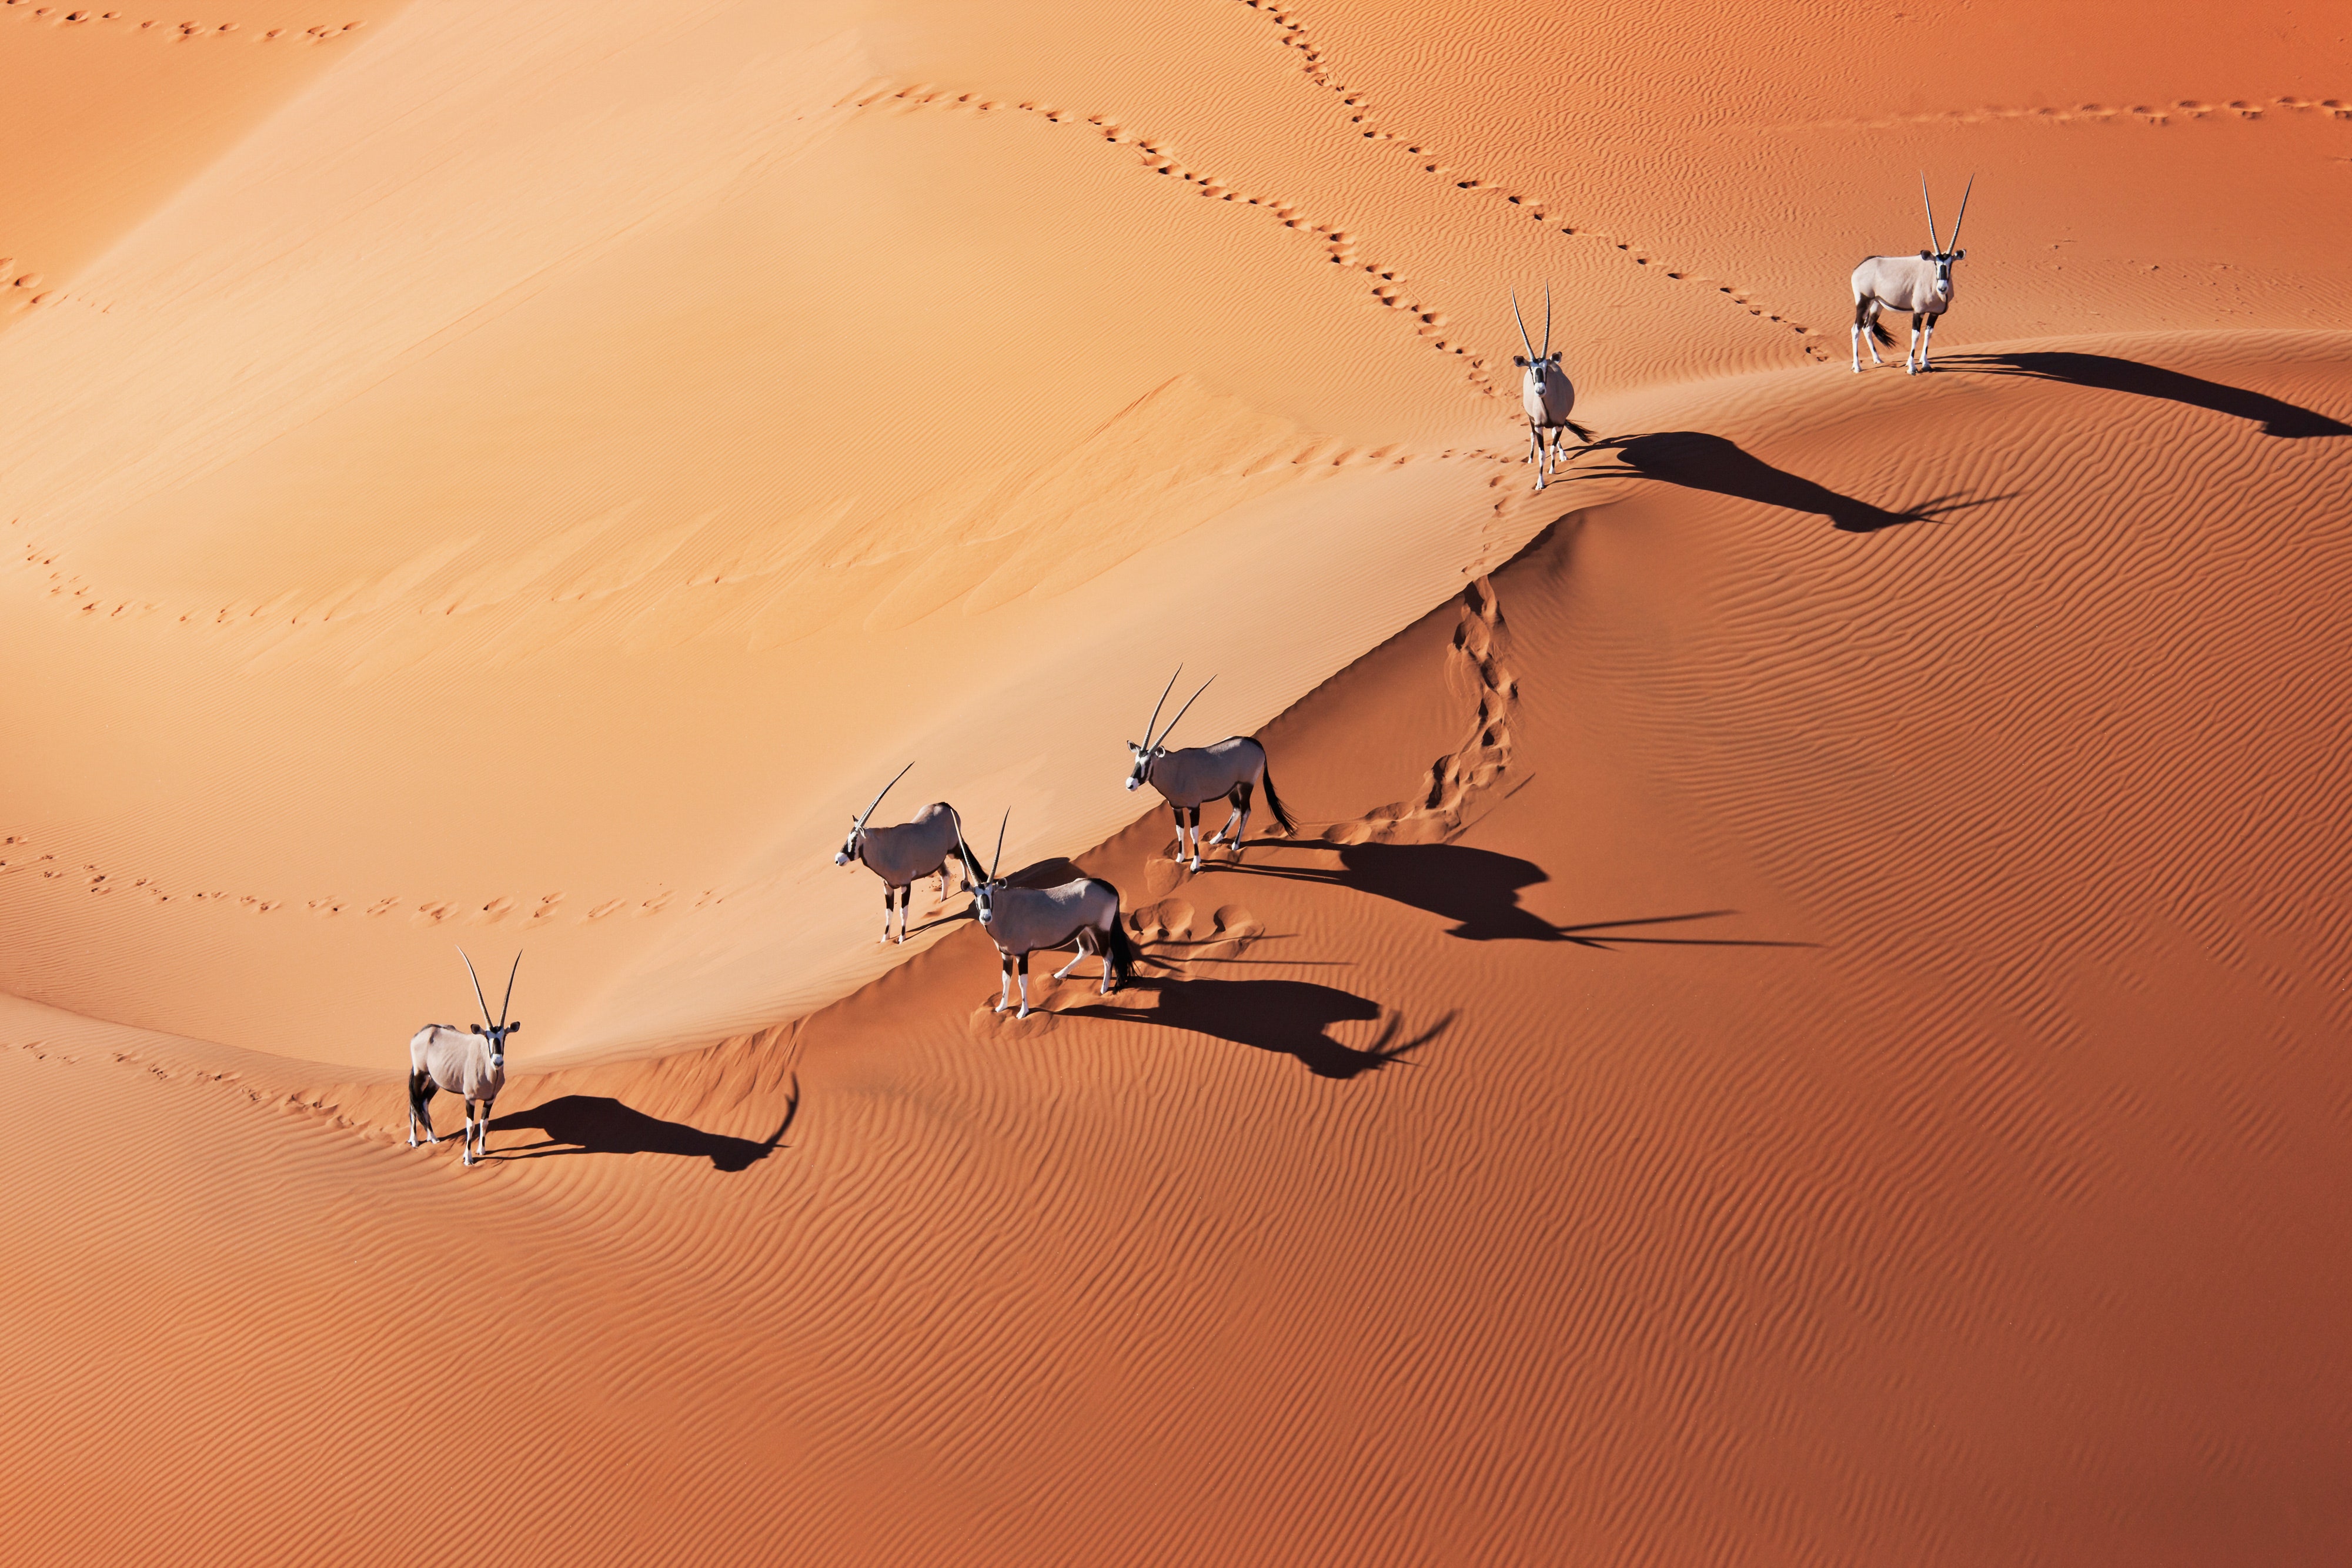 With its otherworldly landscapes and populations of rhinos, giraffes, and elephants, the Namib Desert is like nowhere else on Earth. In fact, its red sand dunes and skeletal trees might make you think you’ve been transported to Mars instead of Southwest Africa.<p>Sign up to receive the latest news, expert tips, and inspiration on all things travel</p><a href="https://www.cntraveler.com/newsletter/the-daily?sourceCode=msnsend">Inspire Me</a>